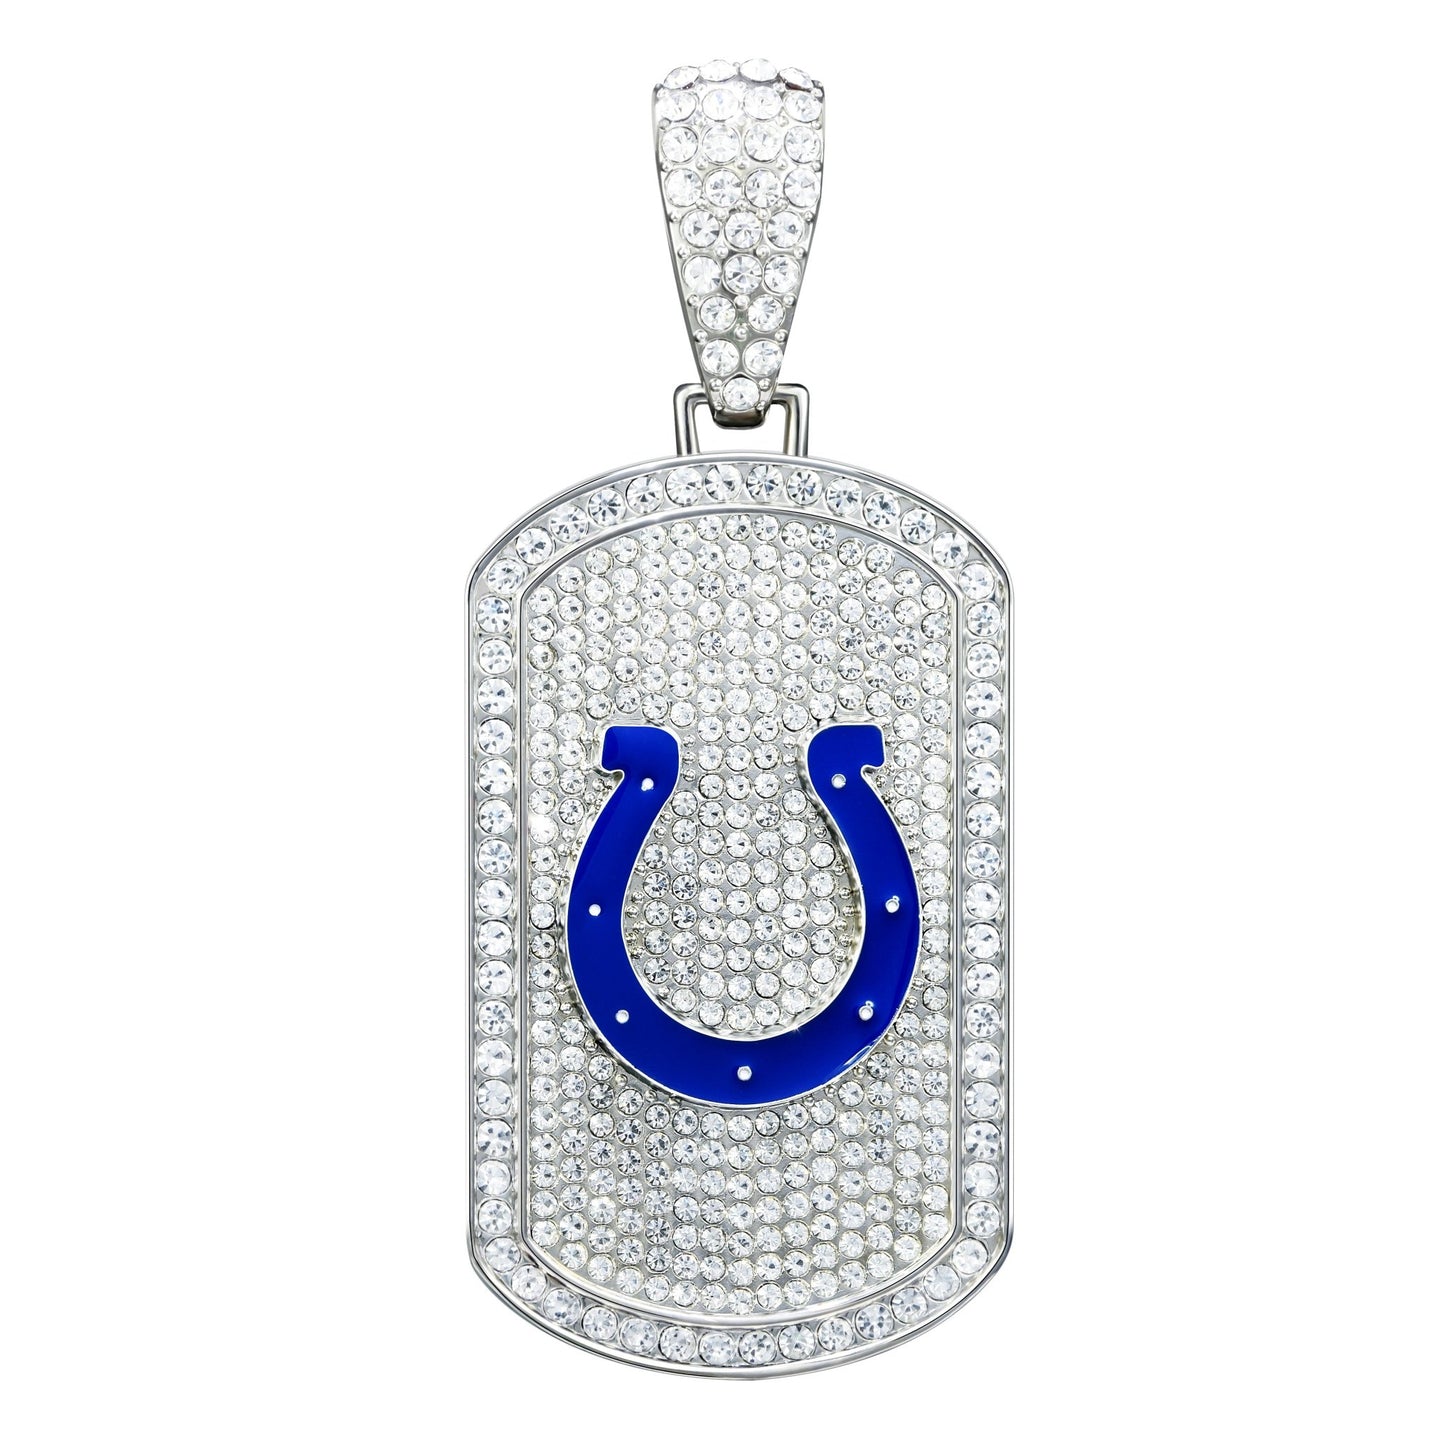 NFL Bling Dog Tag Necklace - Gamedays Gear - Indiana Colts